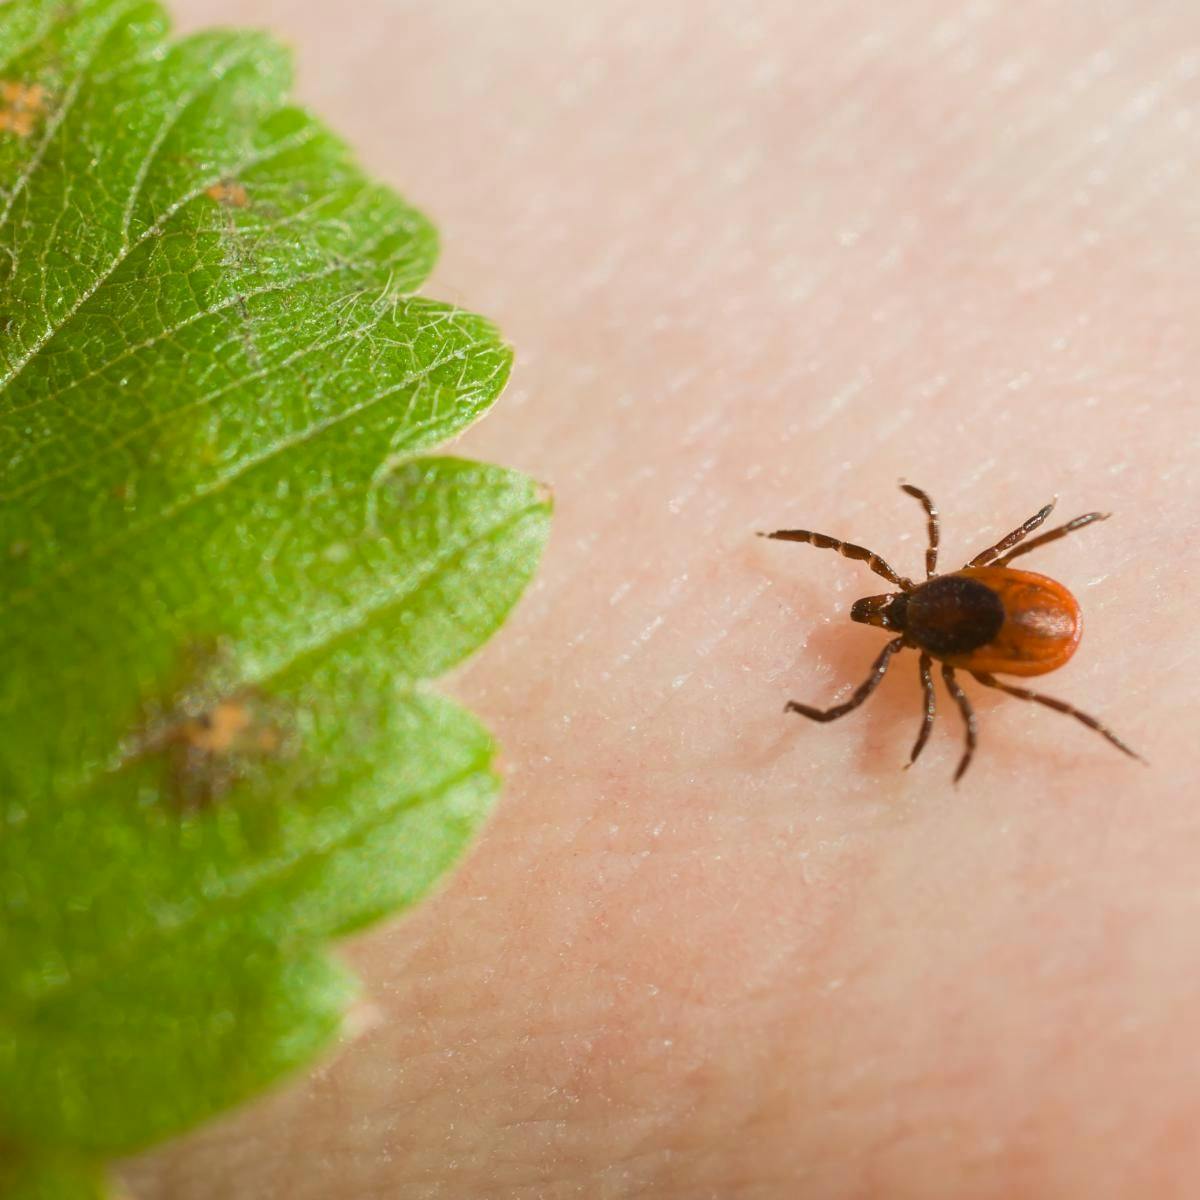 Tick-borne Diseases Are on the Rise in the United States